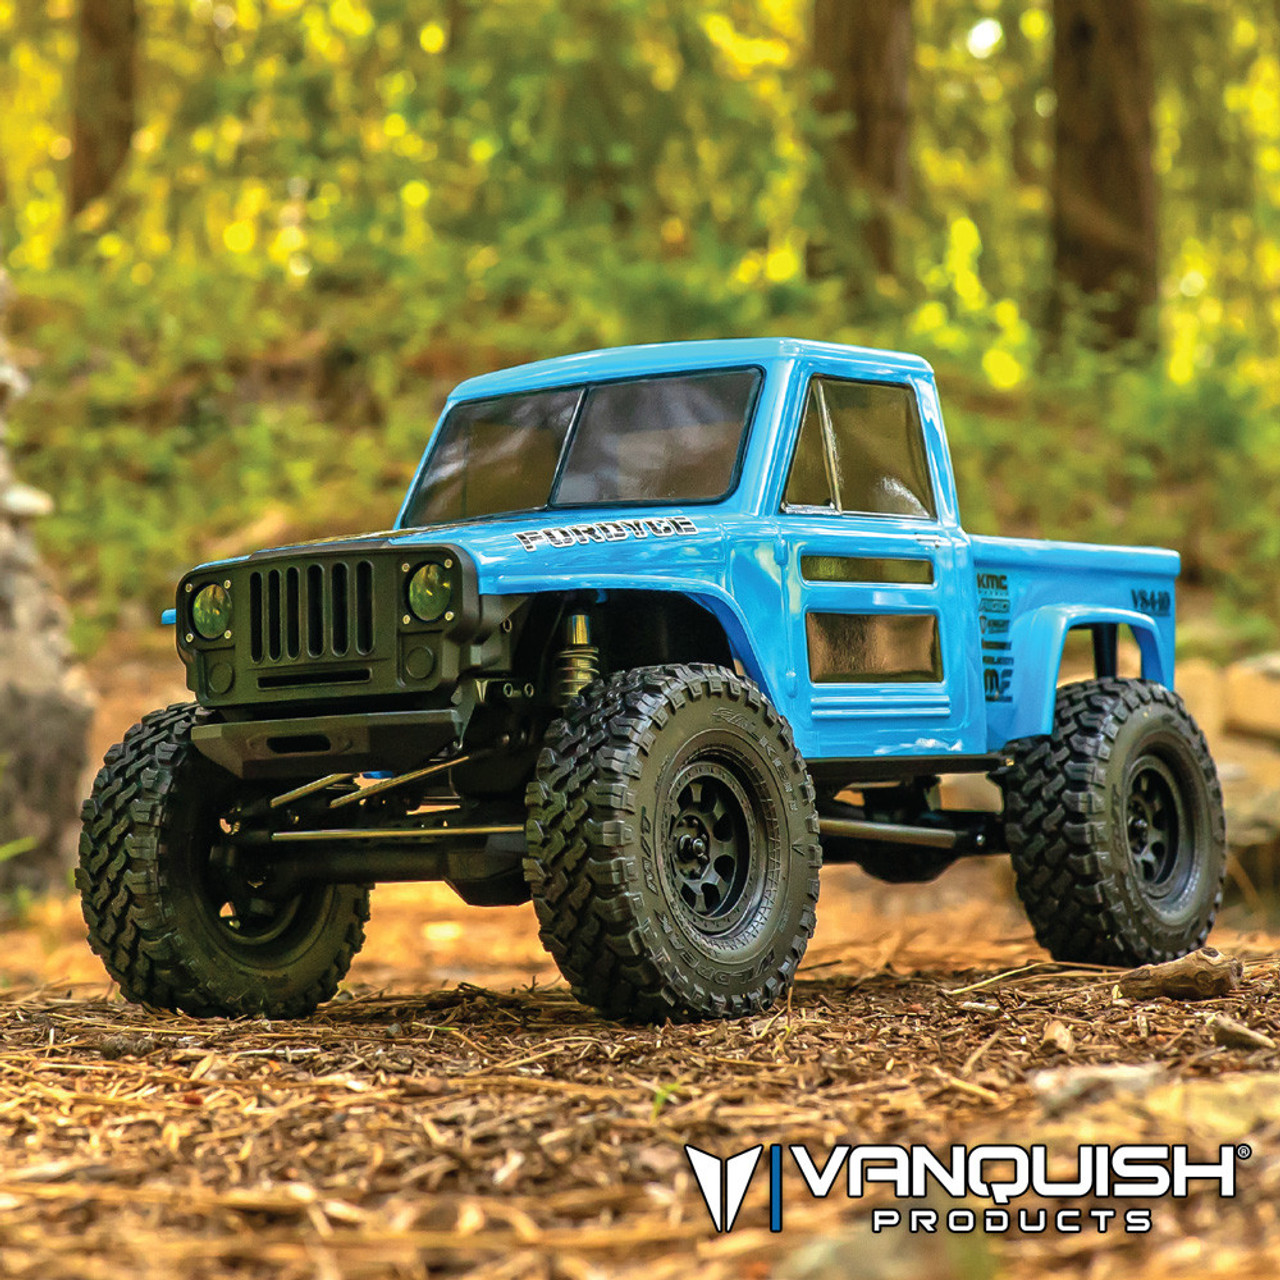 Vanquish Products VS4-10 Fordyce RTR Straight Axle Rock Crawler (Blue)